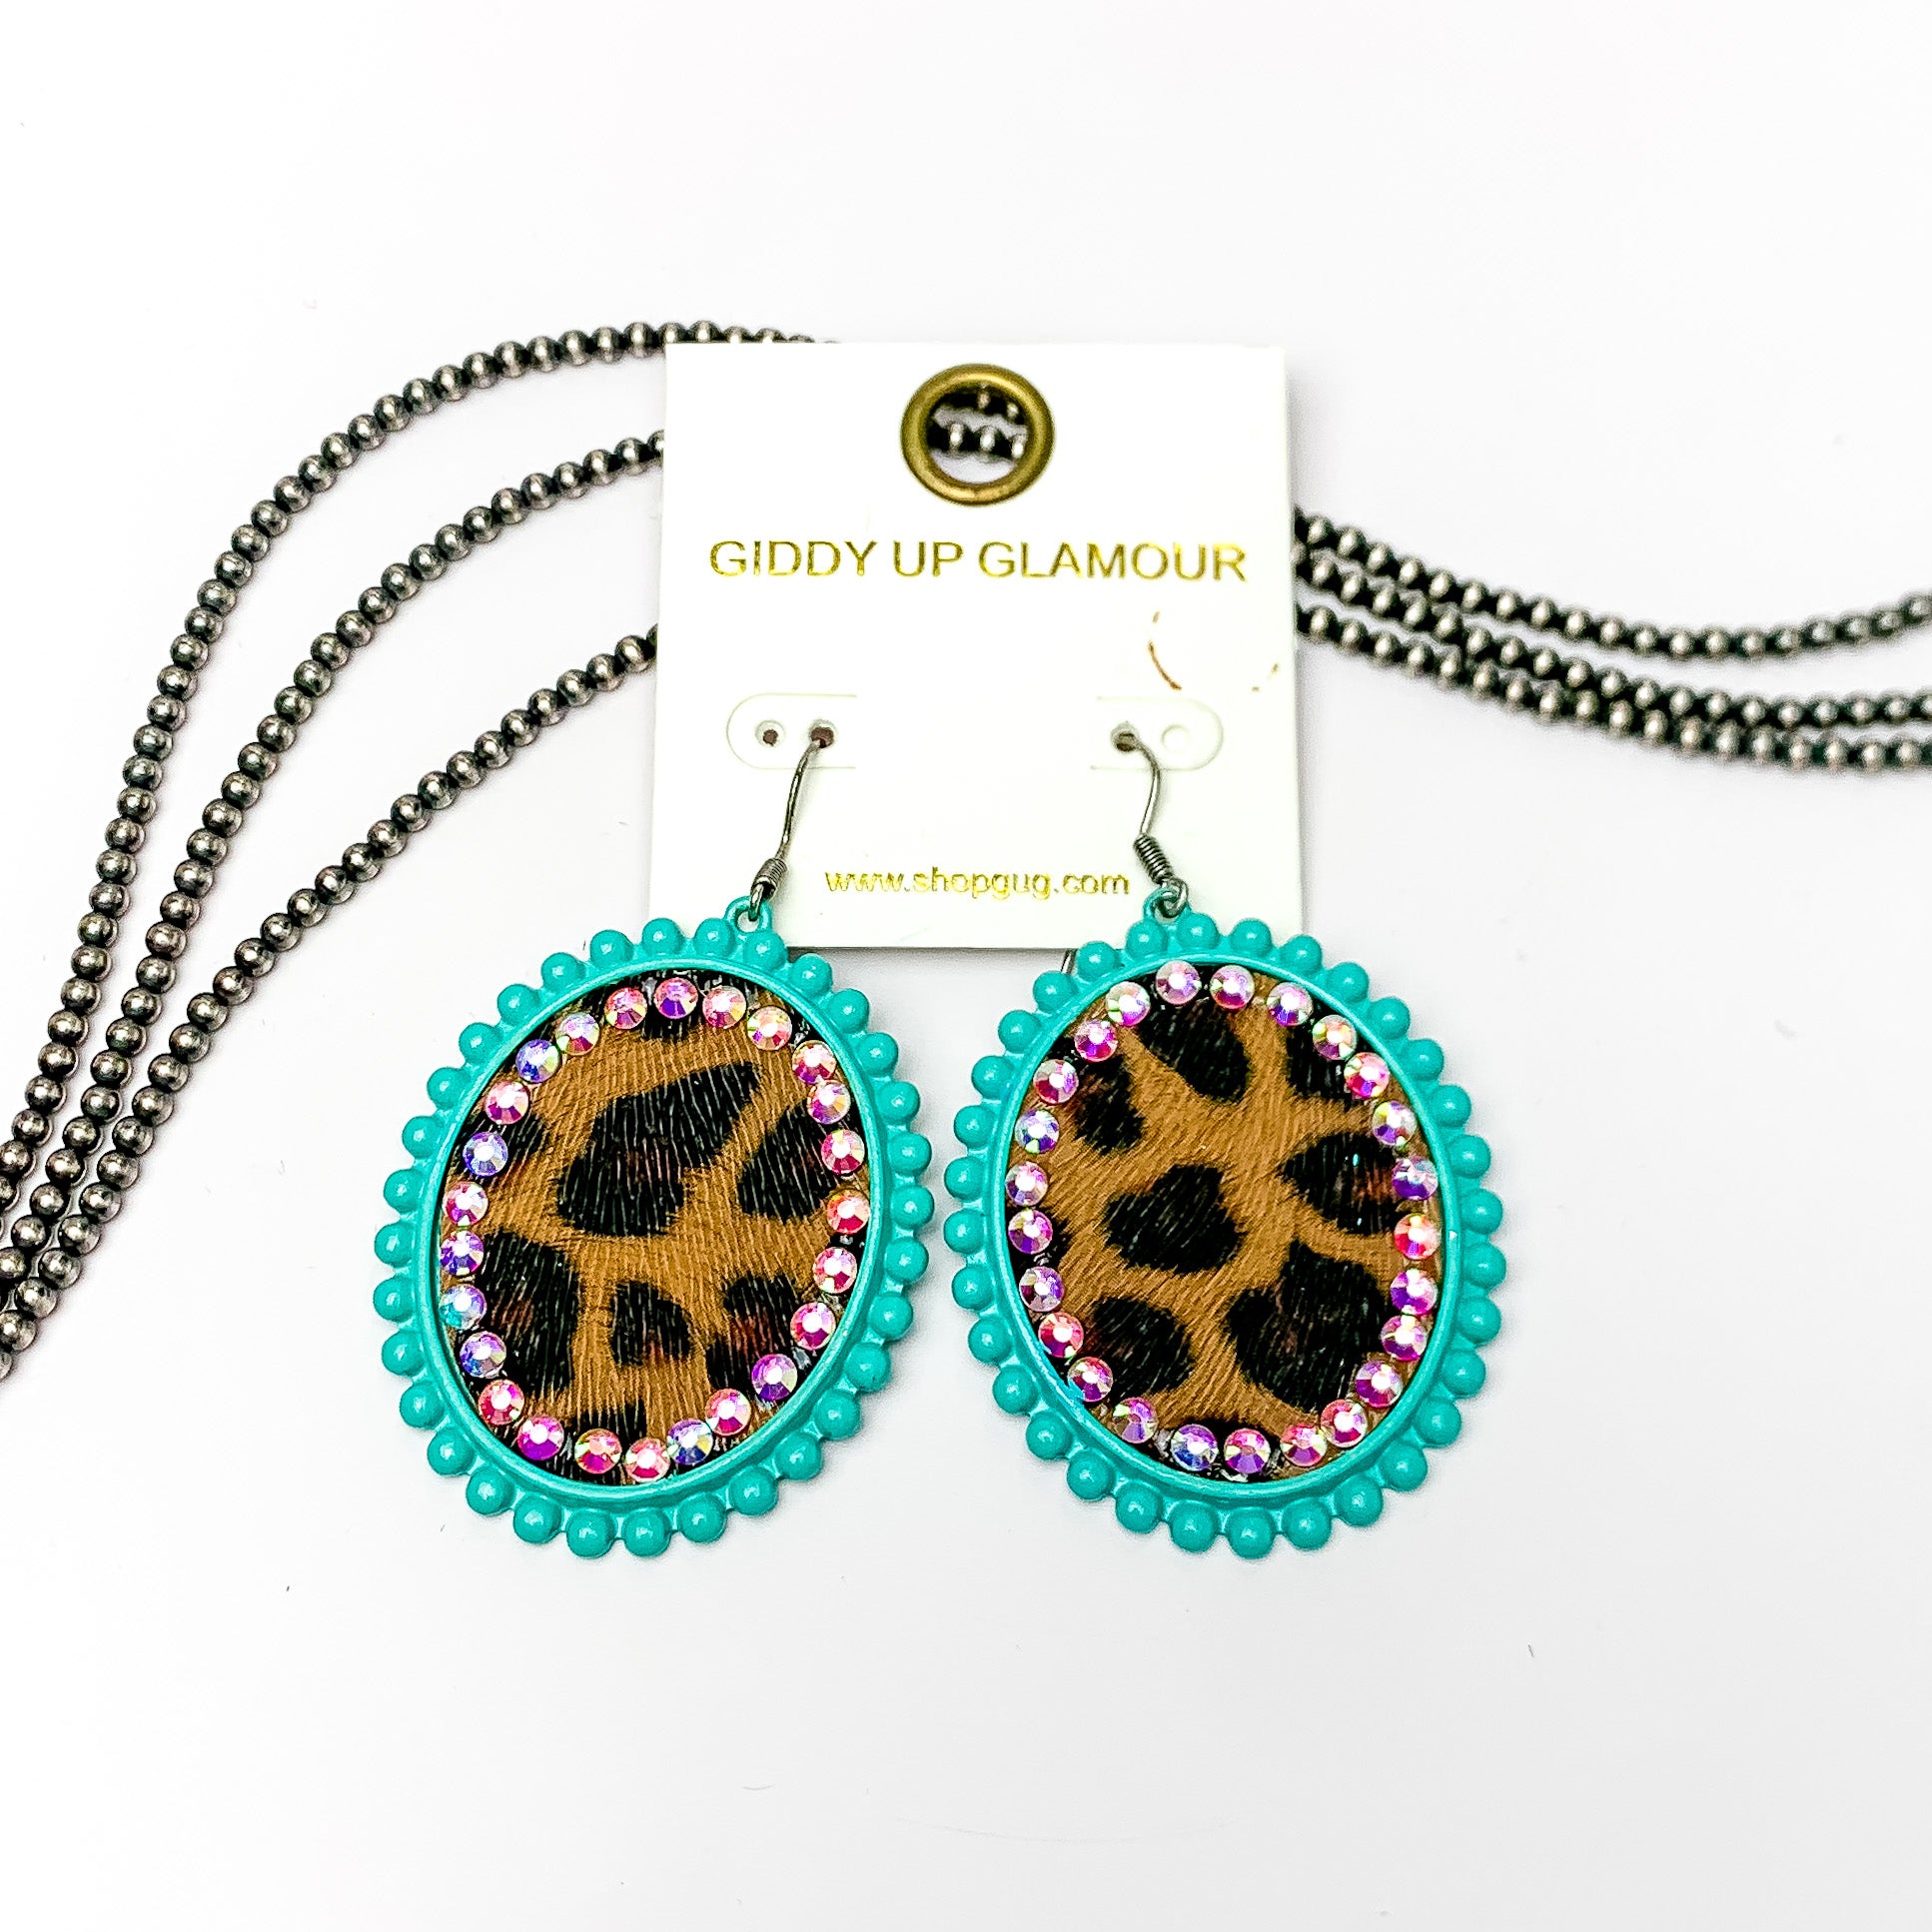 These earrings are oval shaped with leopard print inlay with the outline of the earring is turquoise but also has ab crystal going around the oval shape. These pair of earrings are pictured on a white background with navajo pearls behind it.